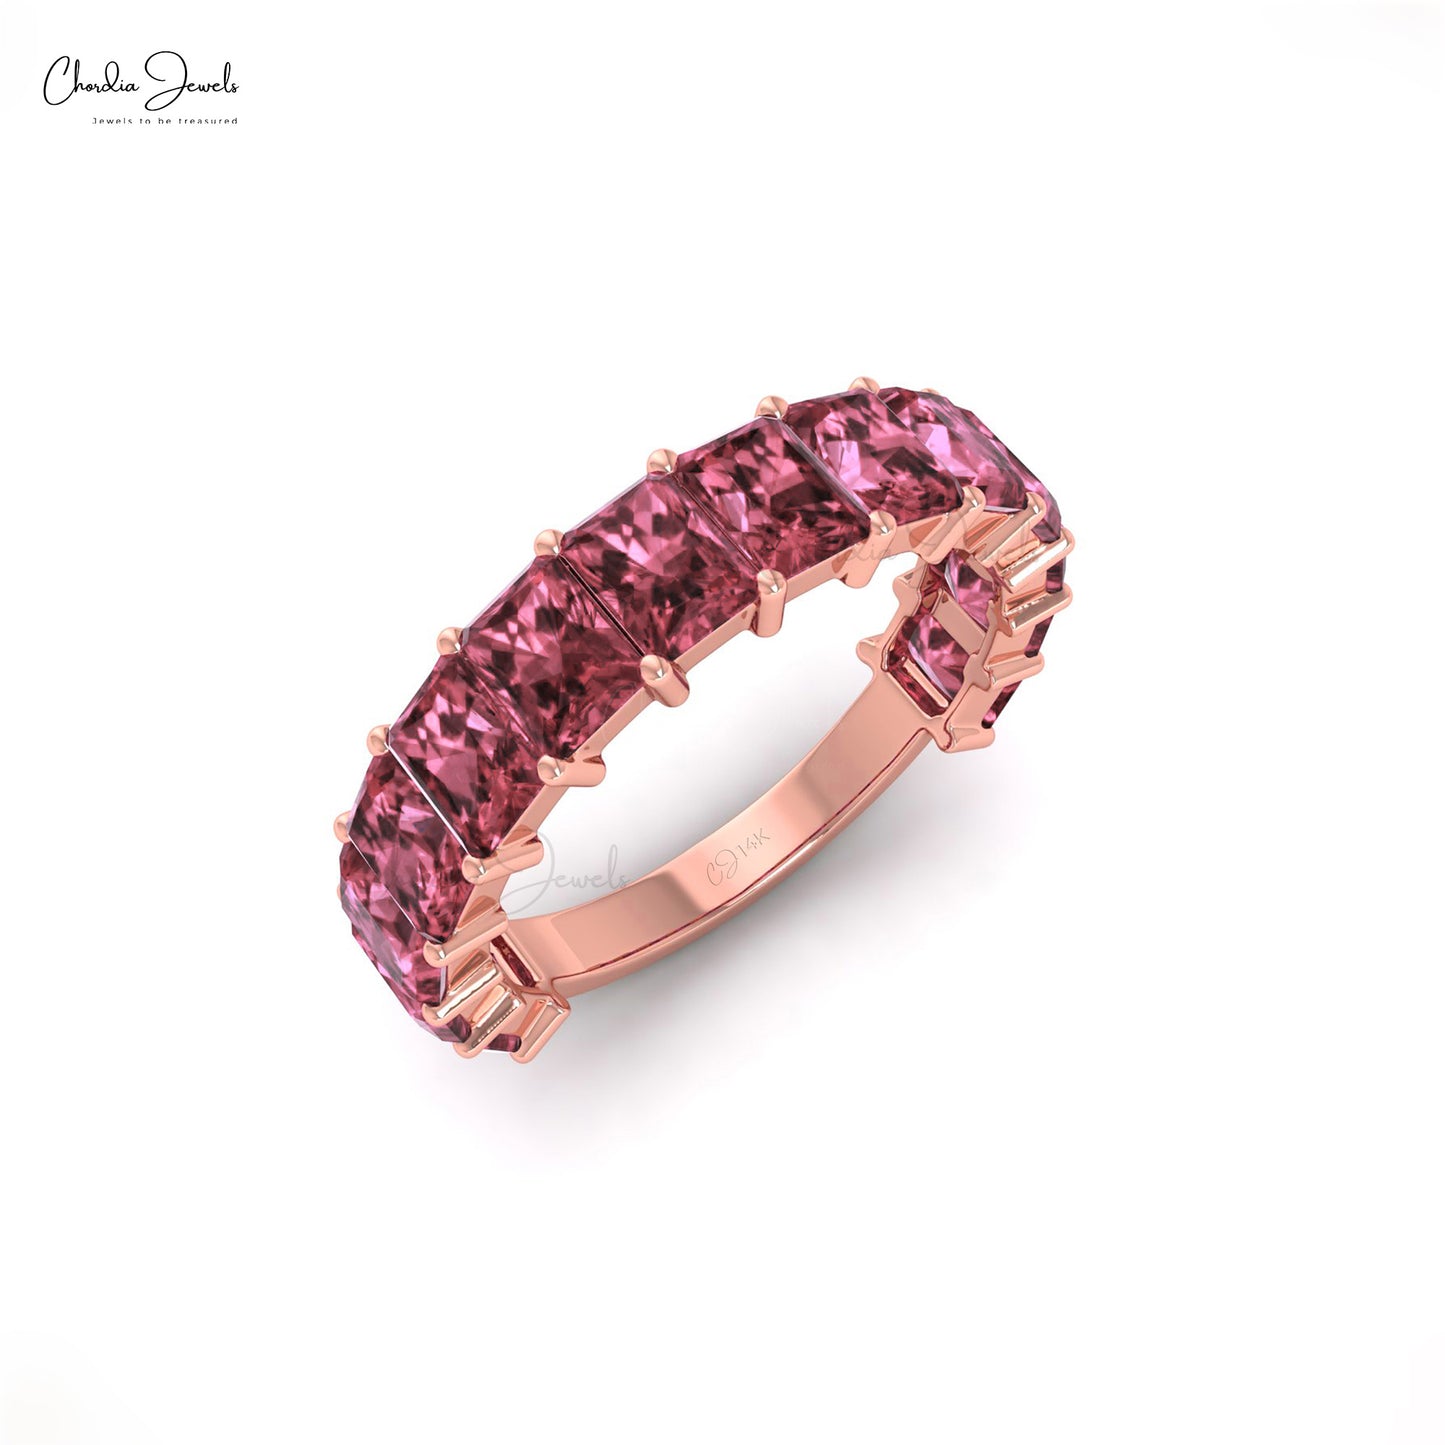 3.36 Carat Natural Pink Tourmaline Half Eternity Band For Her, 14k Solid Gold Gemstone Band For Wedding Gift